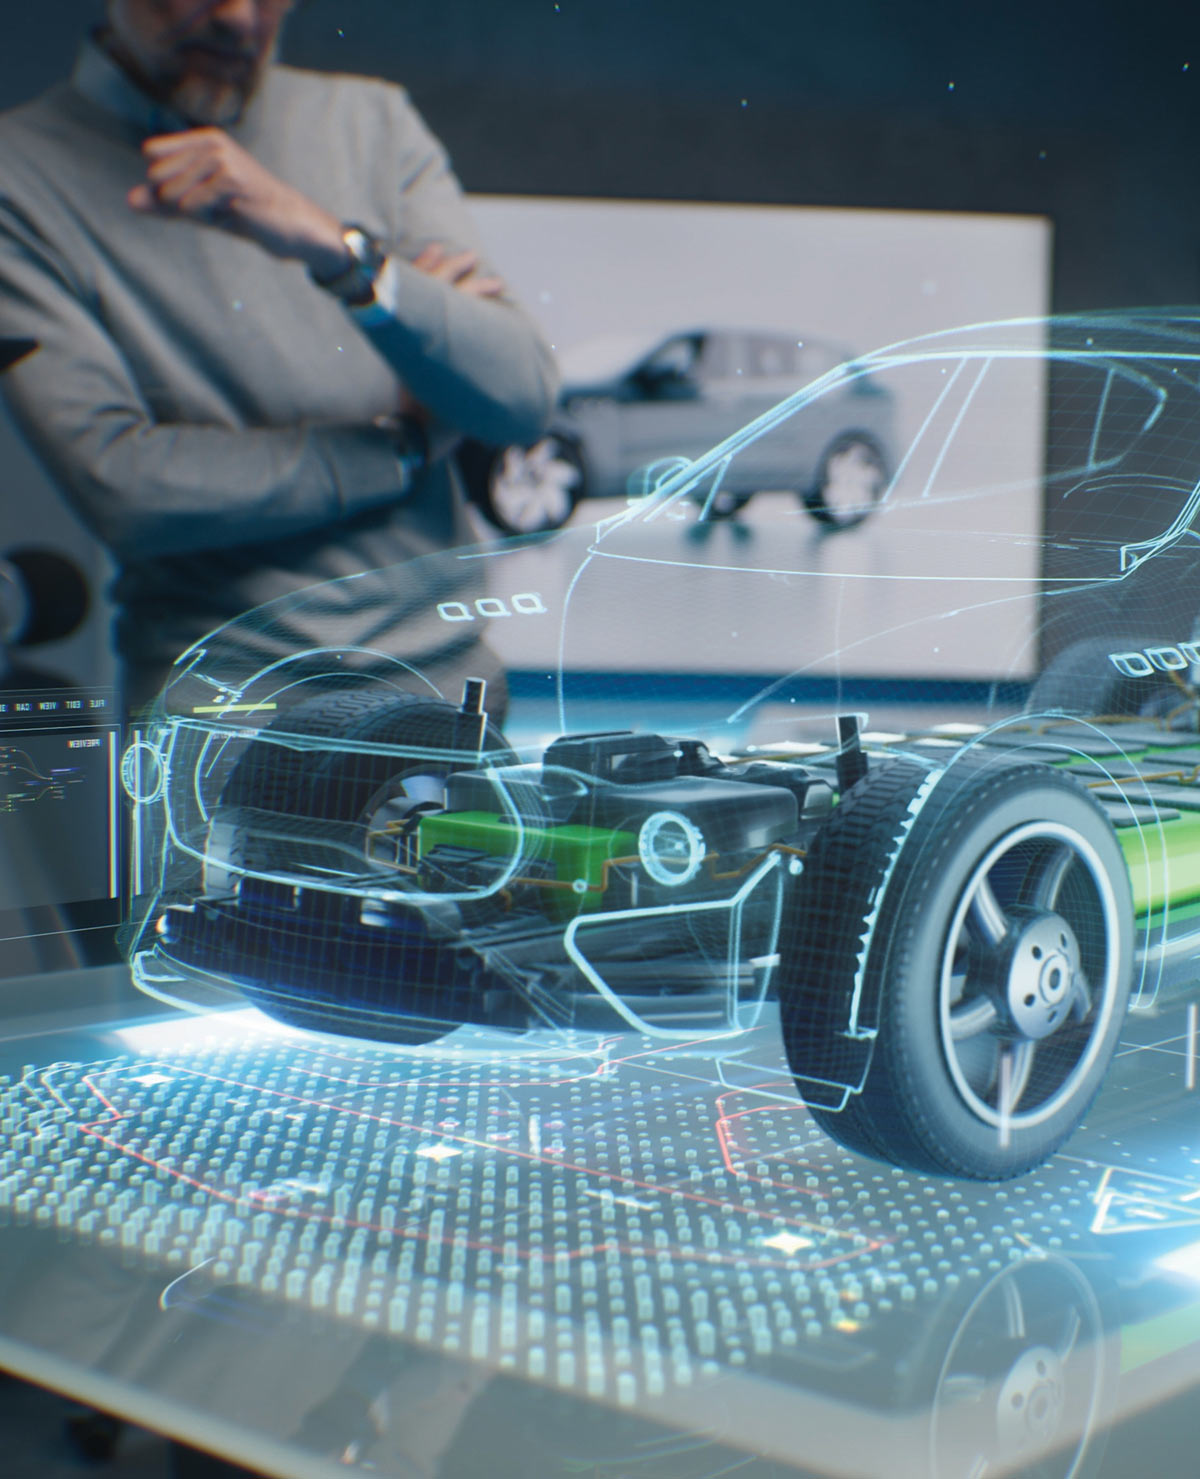 Futuristic hologram of a car being designed above a table, a man looking at it in the background